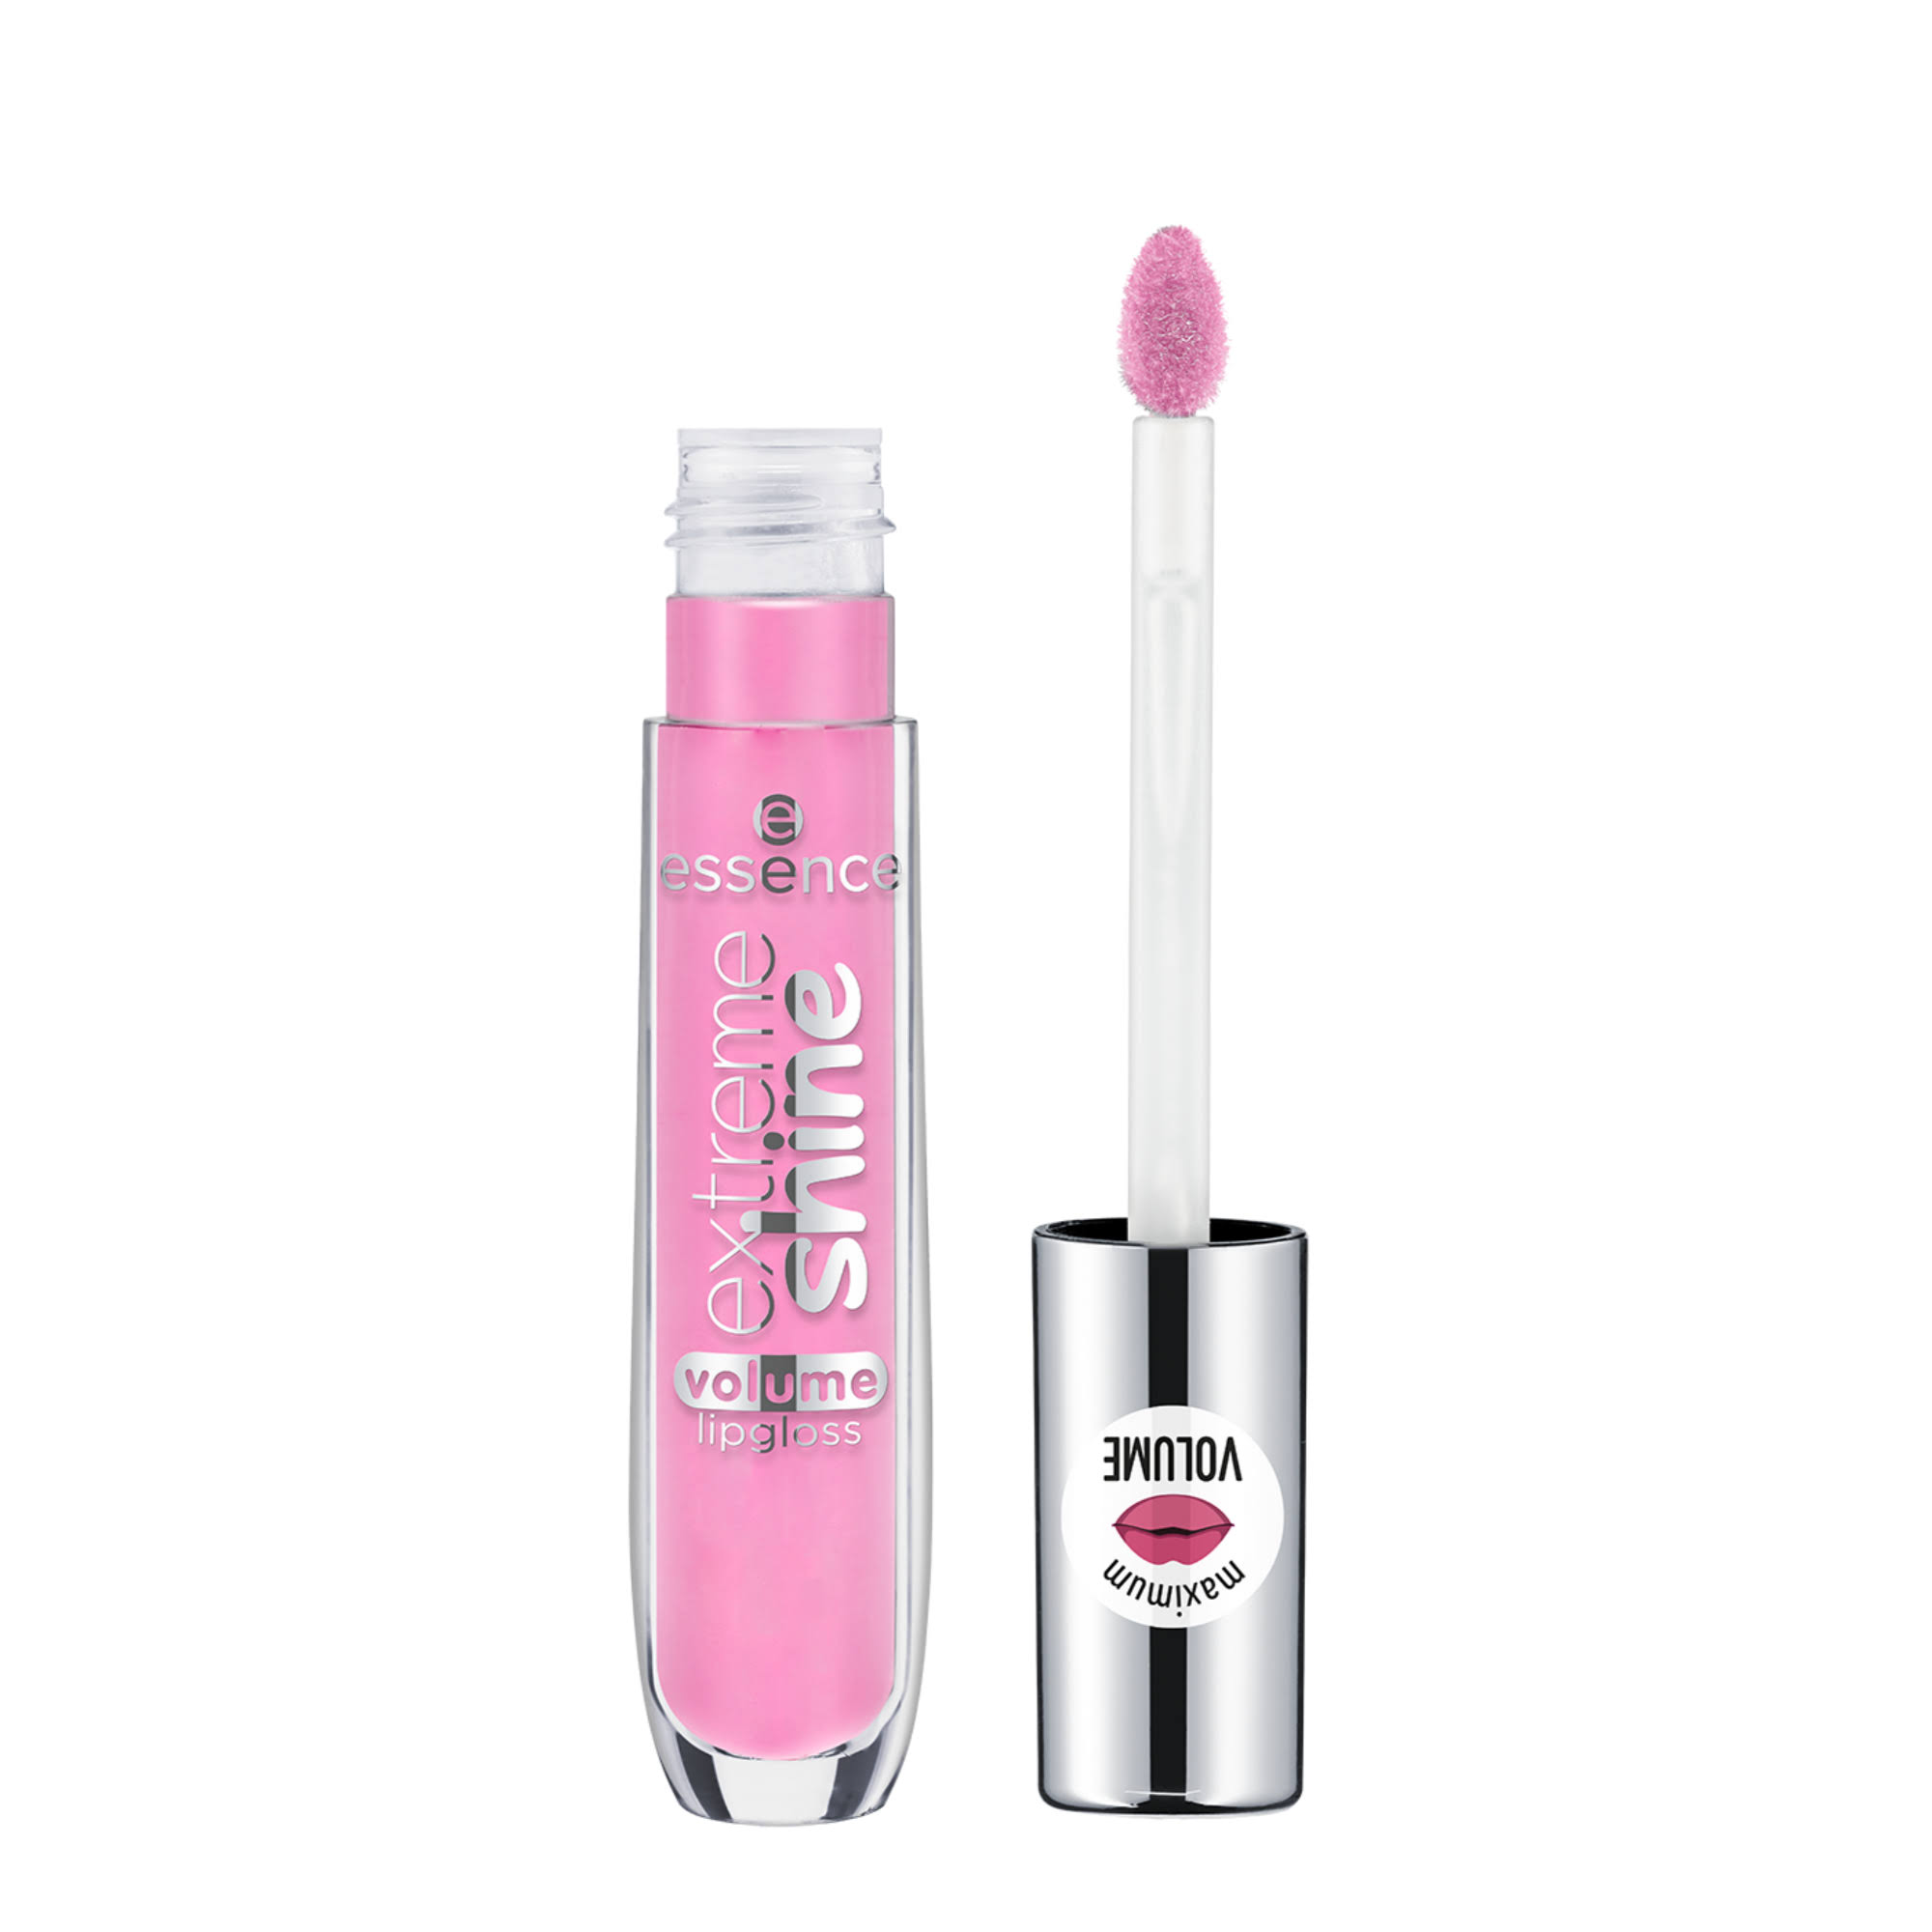 Essence Extreme Shine Volume Lipgloss in Flower Blossom